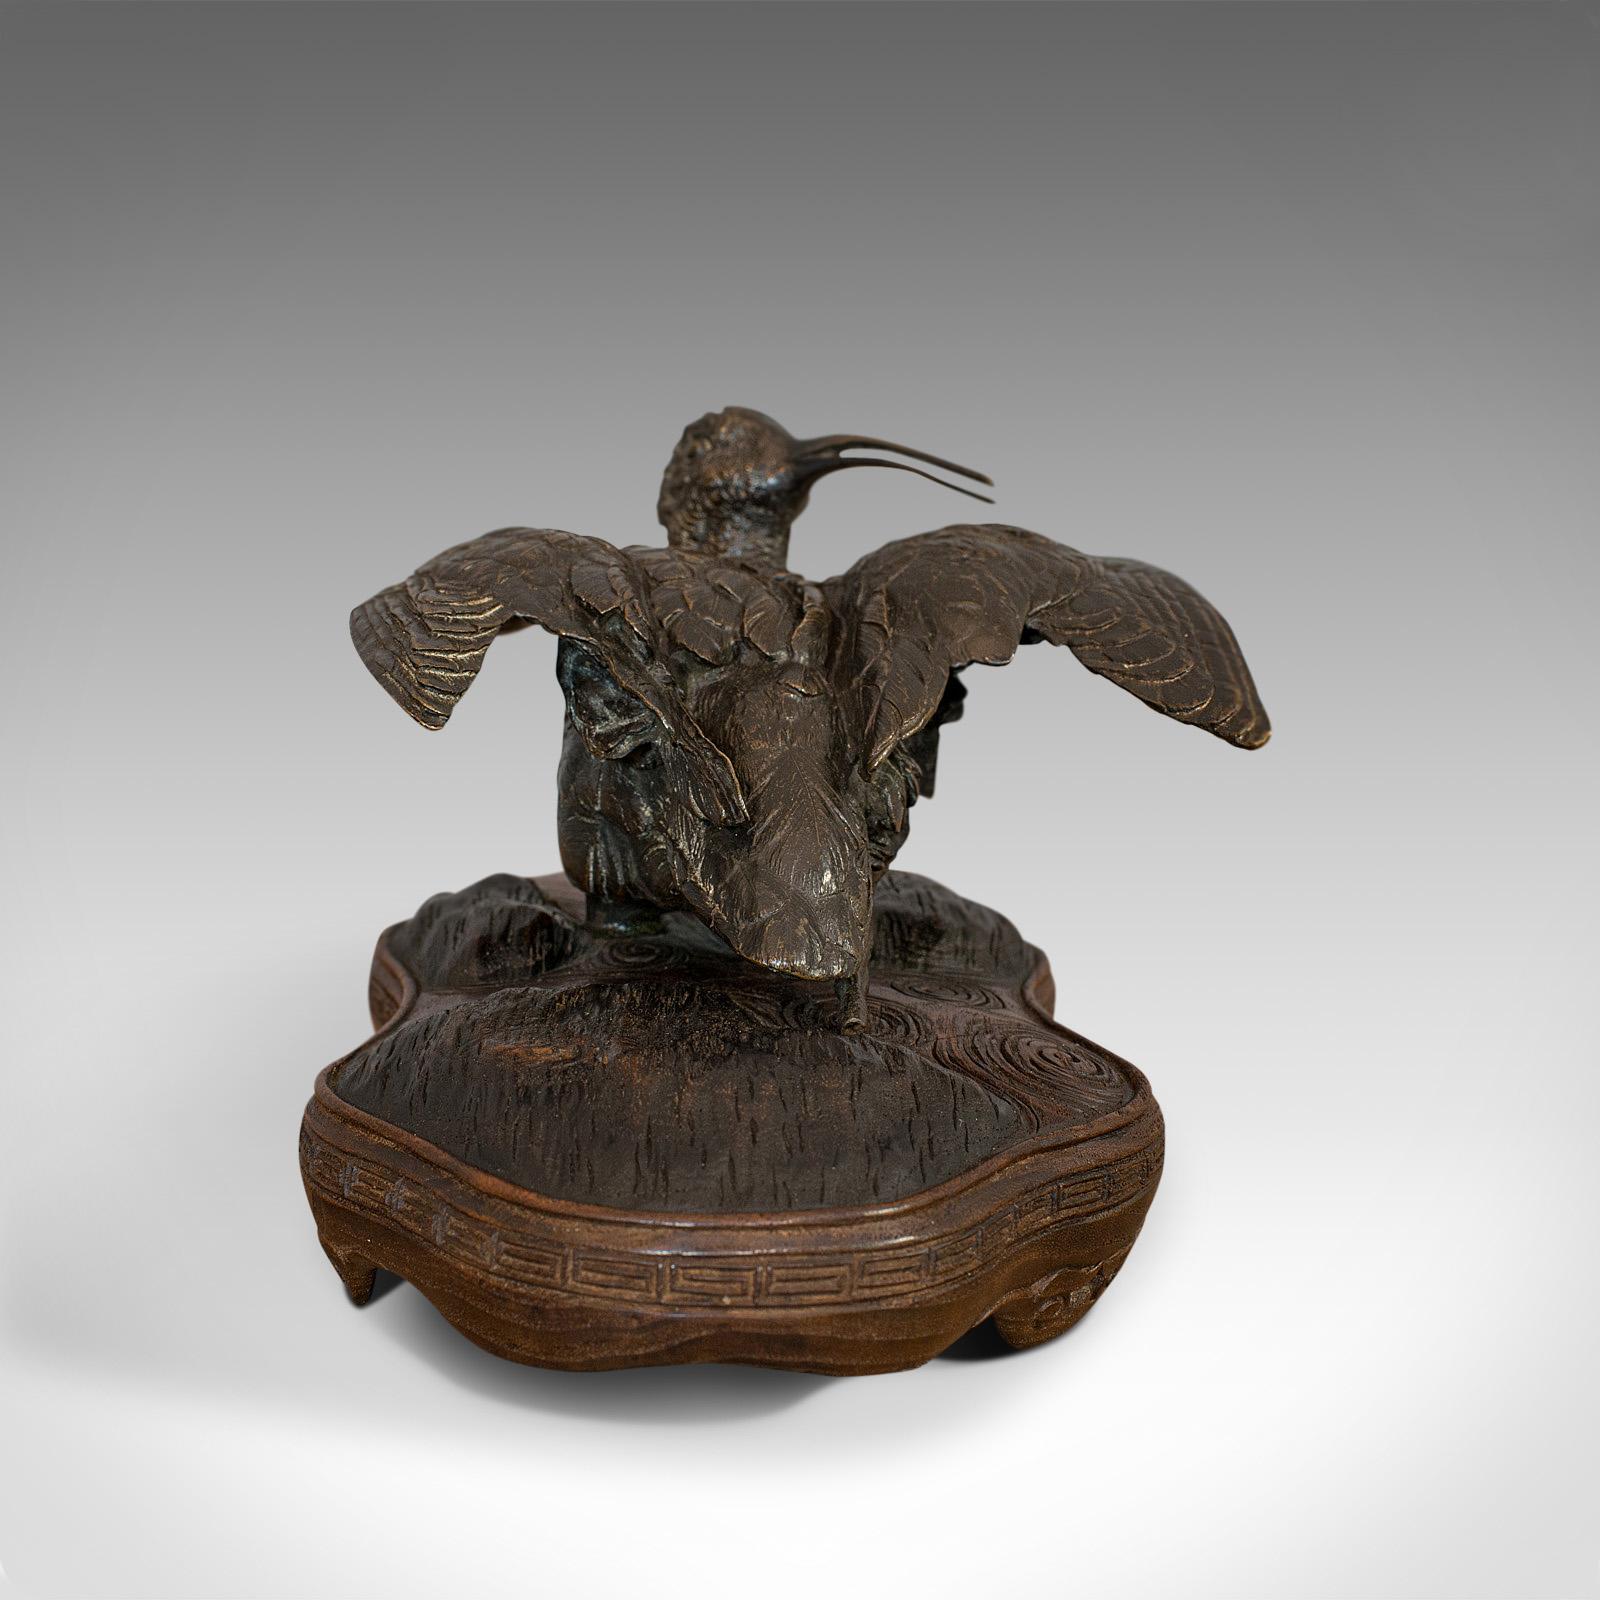 This is an antique study of a curlew. An Oriental, bronze and mahogany decorative small bird, dating to the late 19th century, circa 1900.

The bird sculpted in a sunbathing pose with wings raised
Displays a desirable aged patina
Curlew in